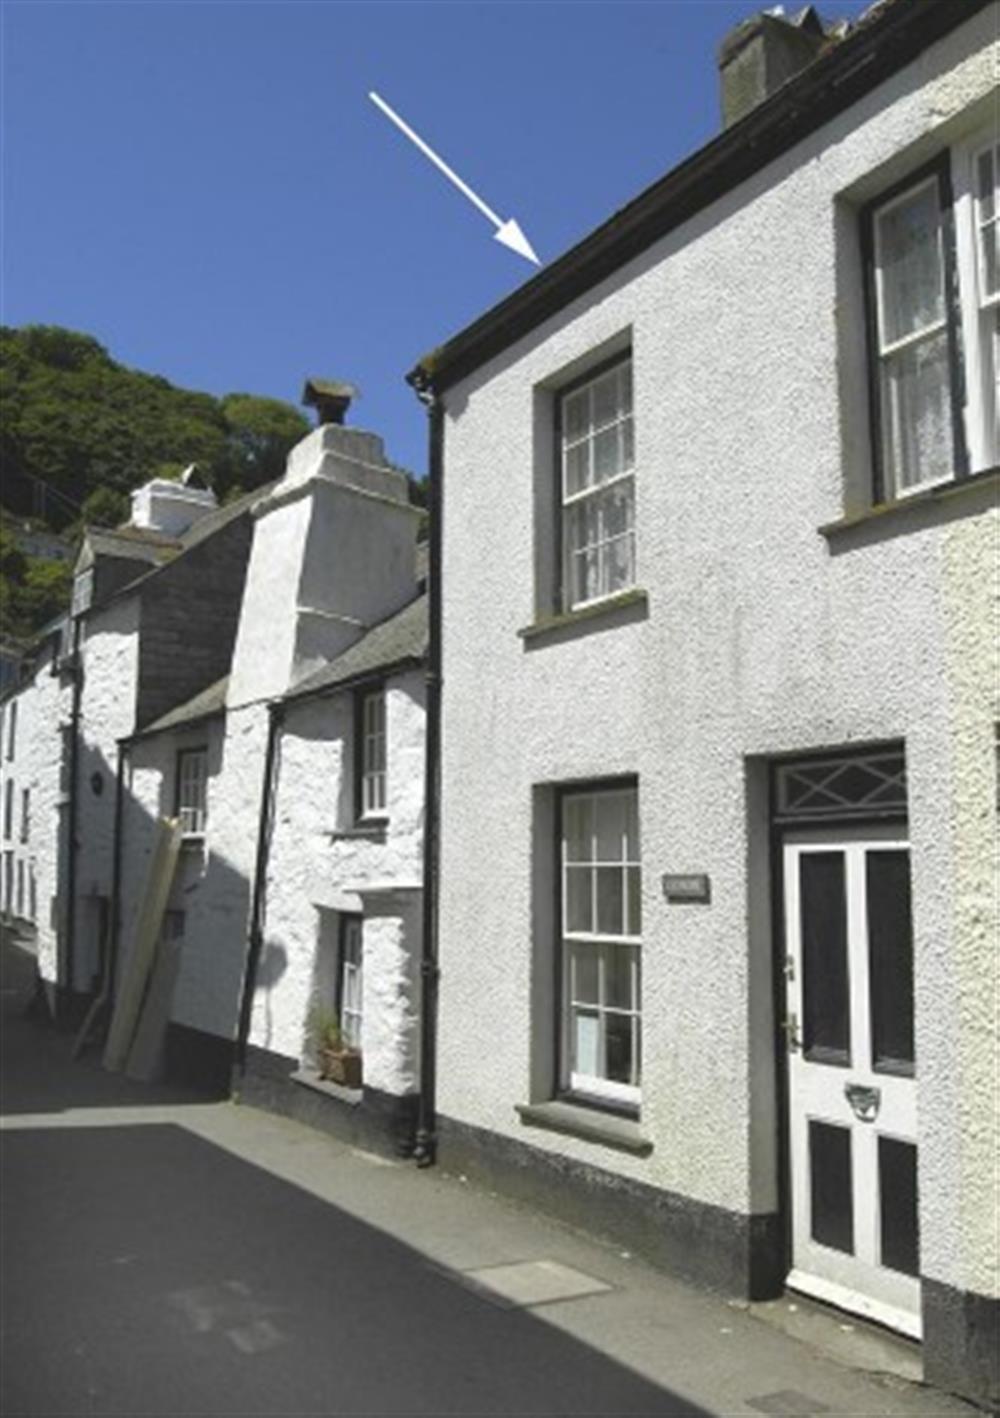 The exterior of Glencoe, shown with an arrow at Glencoe Cottage in Polperro